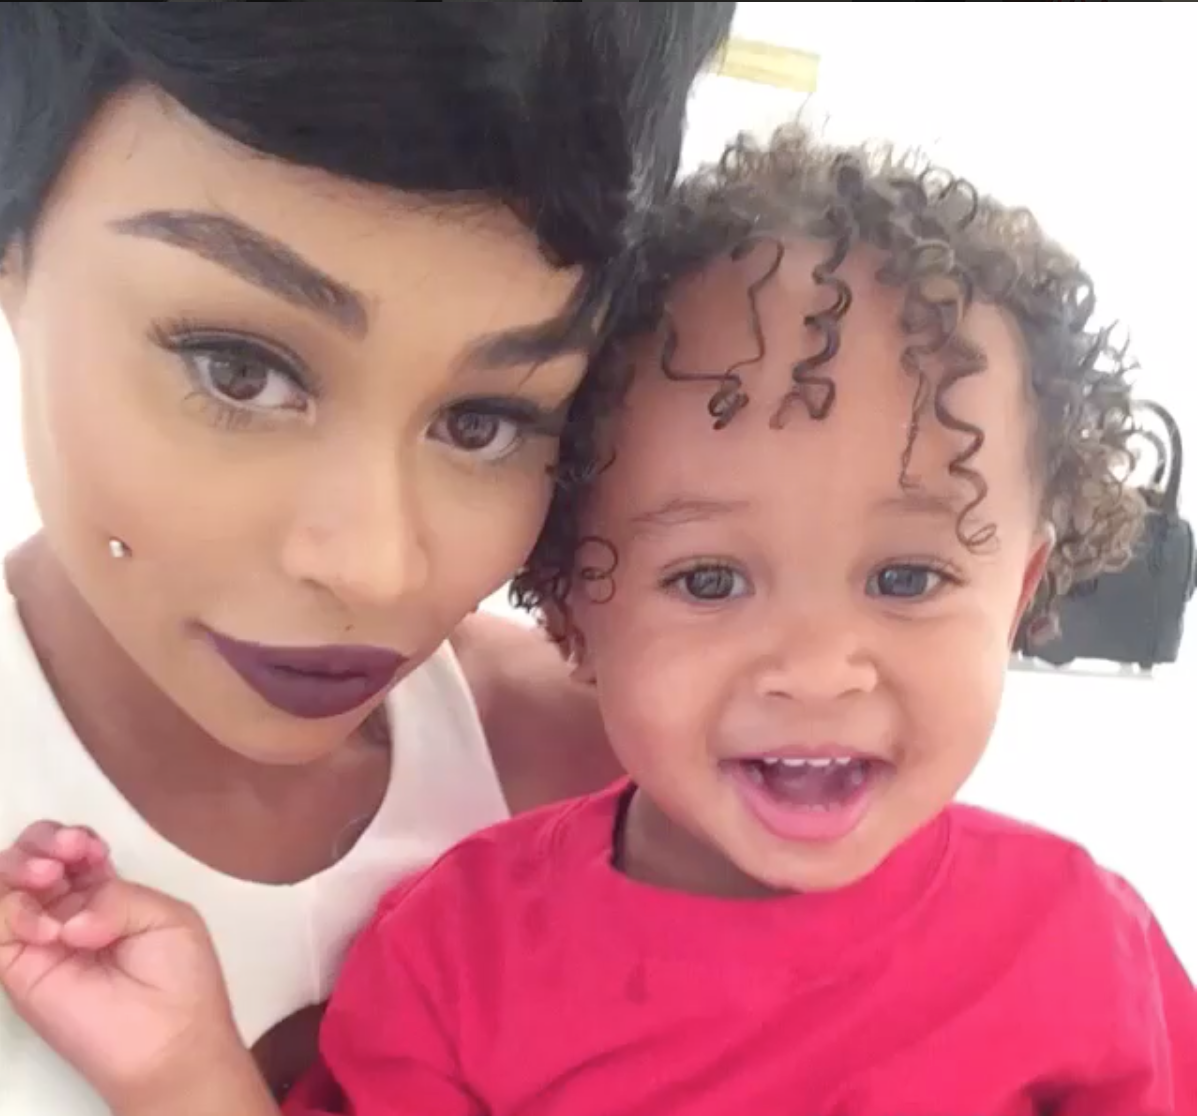 Blac Chyna and Her Son King Cairo are Seriously Besties
